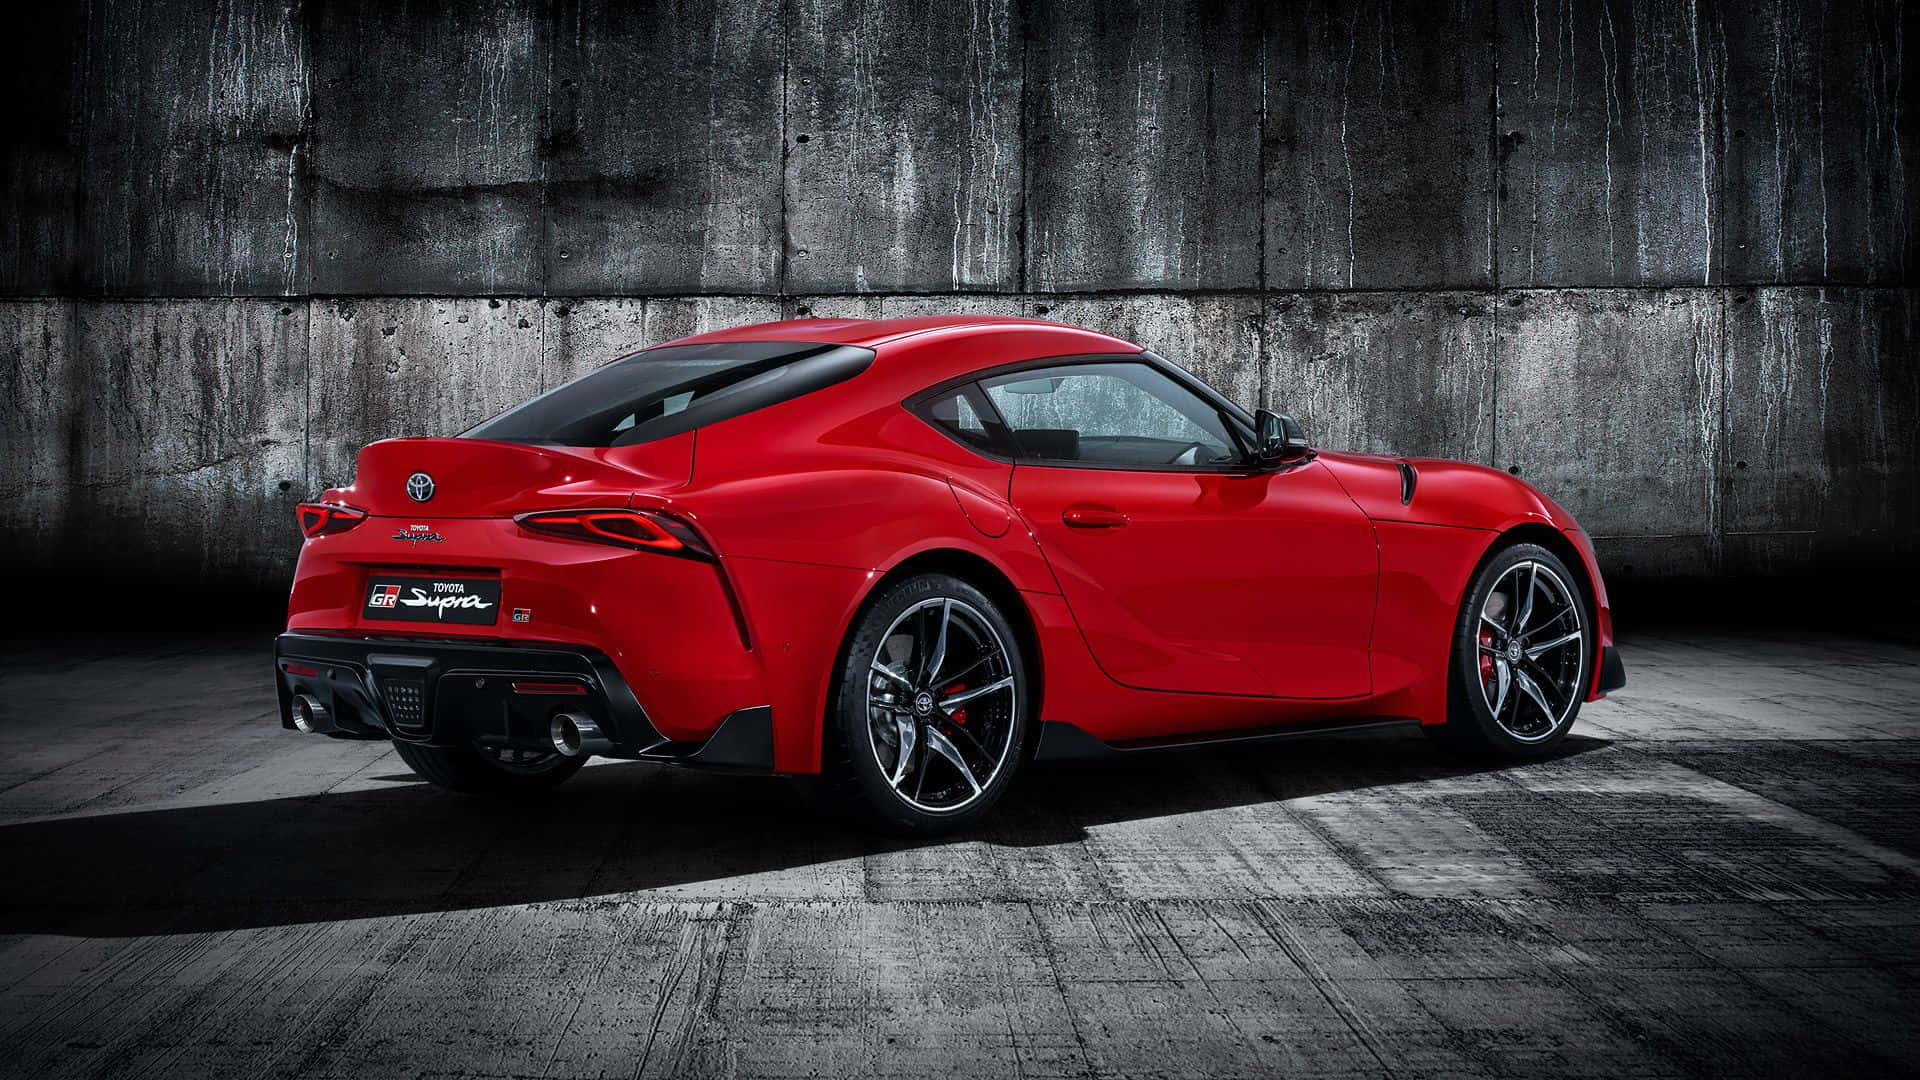 The Red Toyota Supra Is Parked In A Dark Room